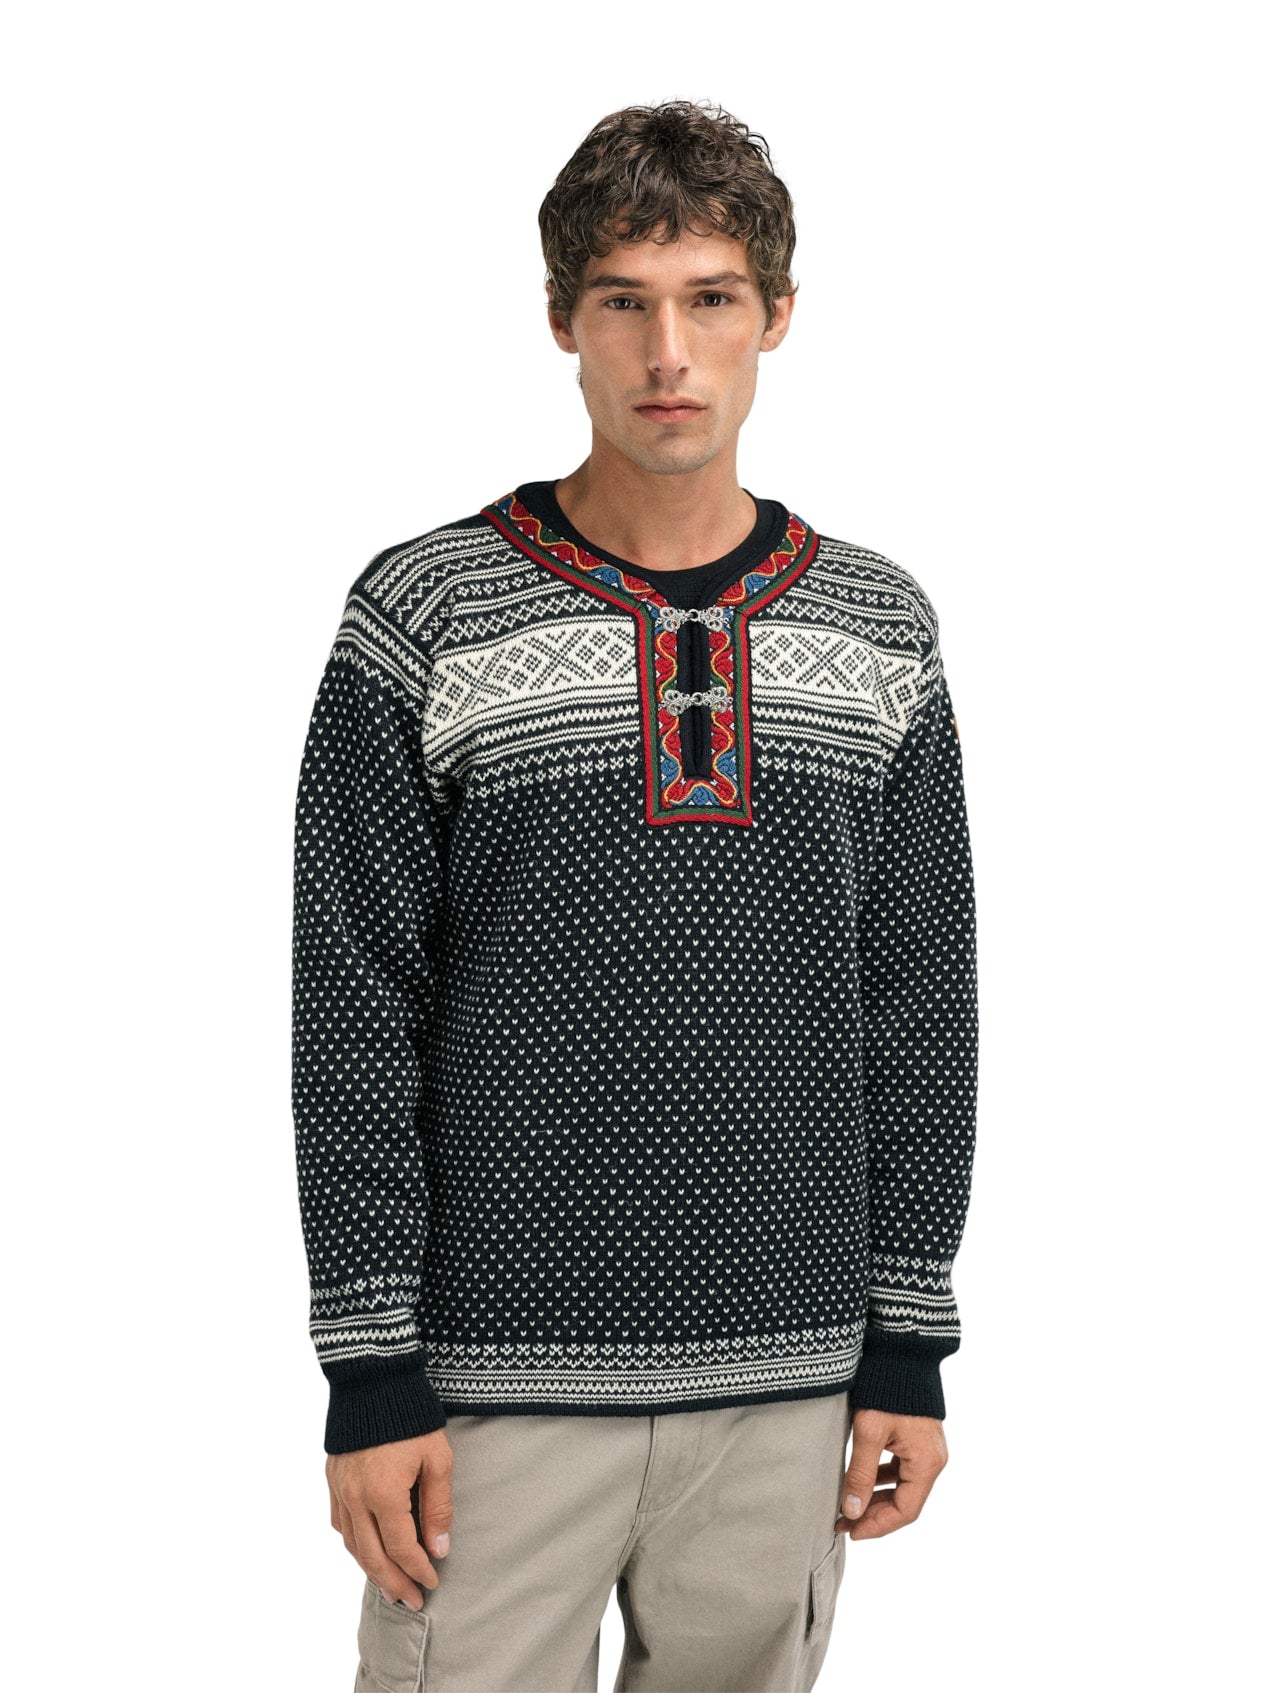 Dale of Norway - Setesdal Sweater - Black offwhite (Unisex)